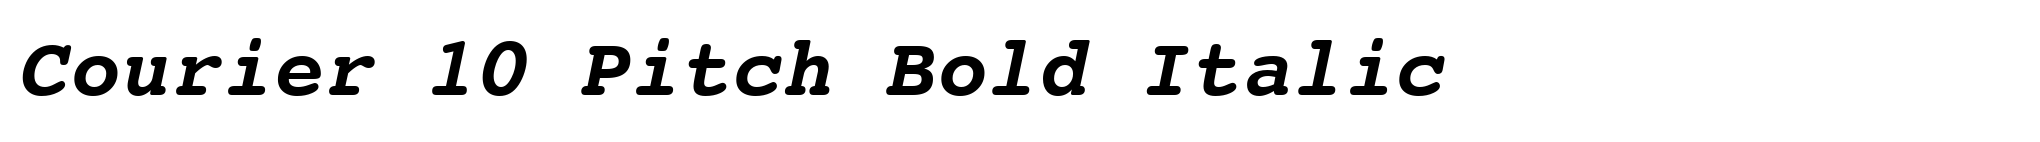 Courier 10 Pitch Bold Italic image